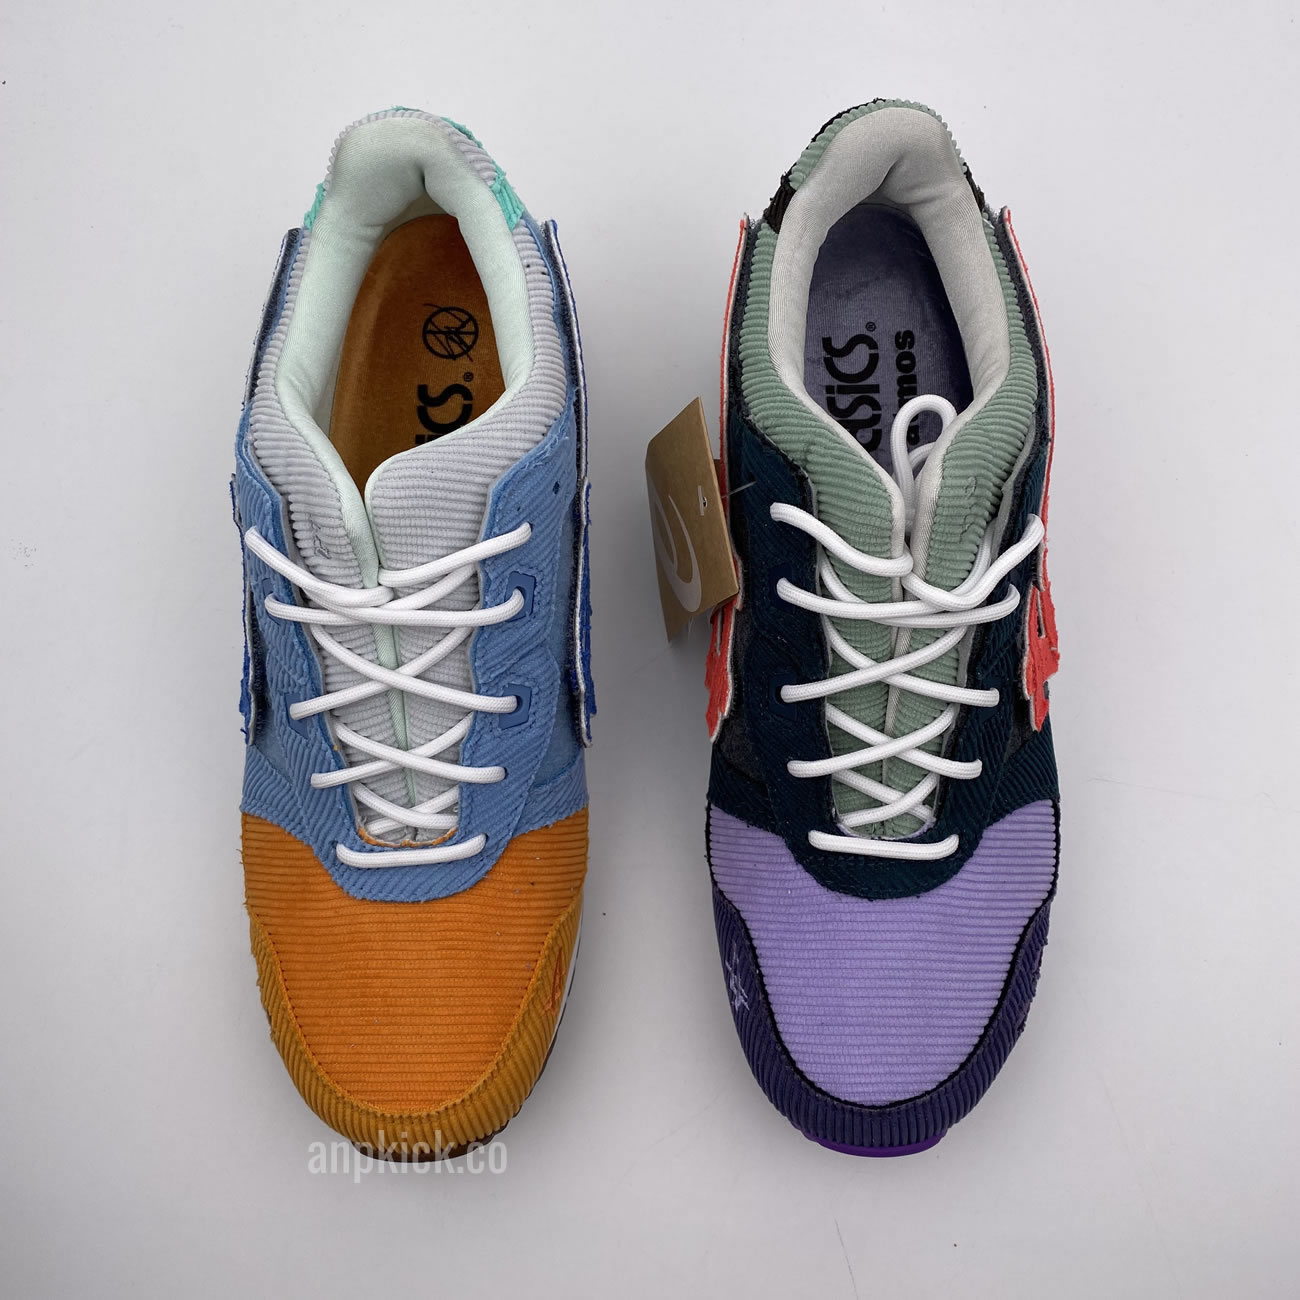 Sean Wotherspoon Atmos Asics Gel Lyte Og Shoes Multi 1203a019 000 (5) - newkick.org